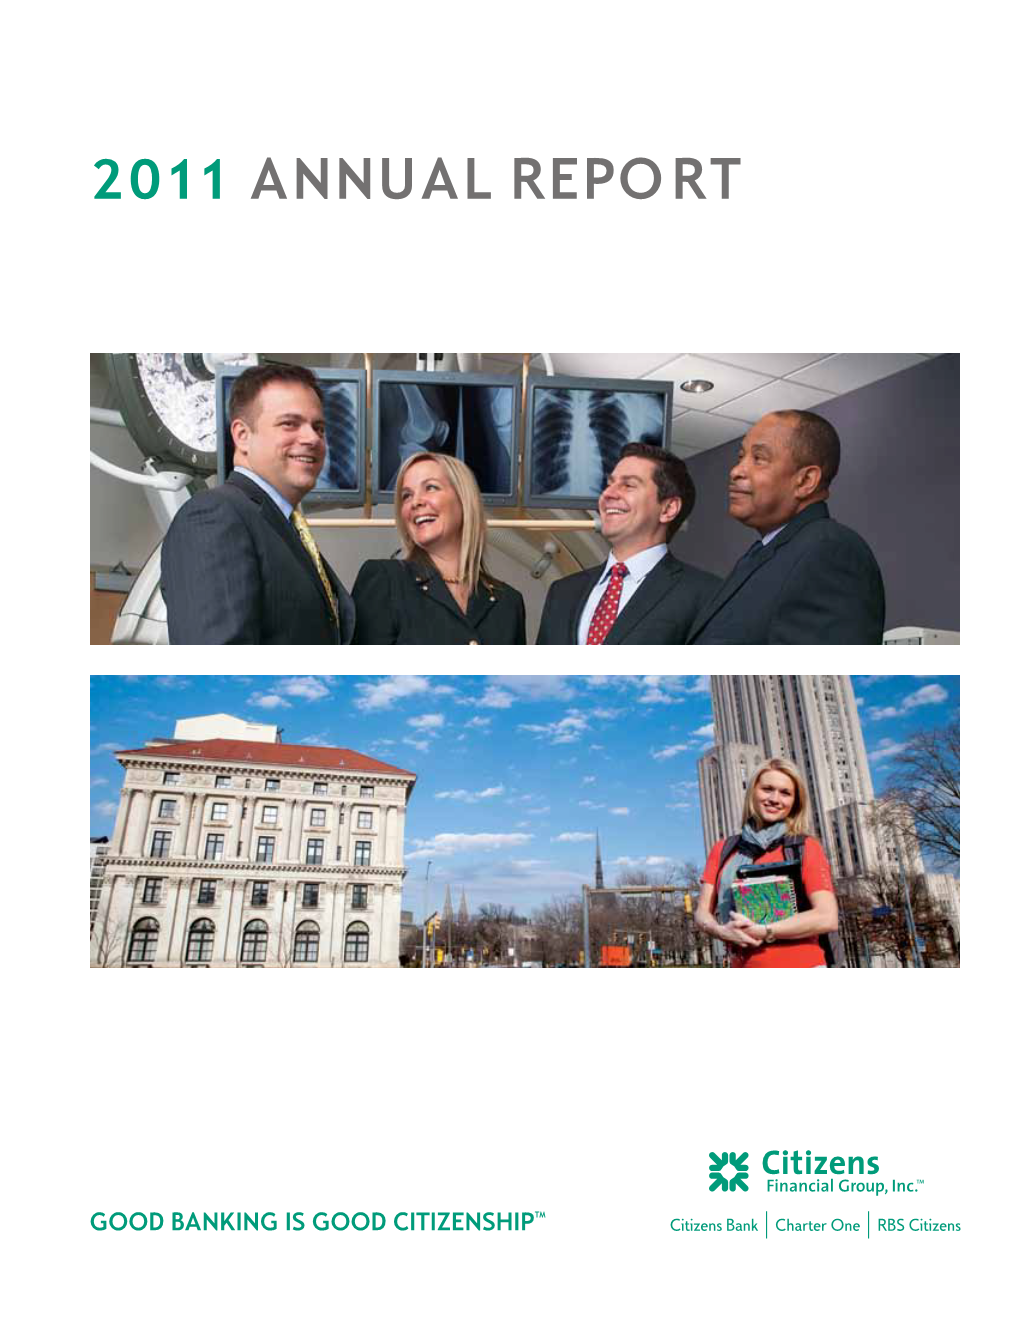 Download Pdf File of Annual Report for Citizens 2011